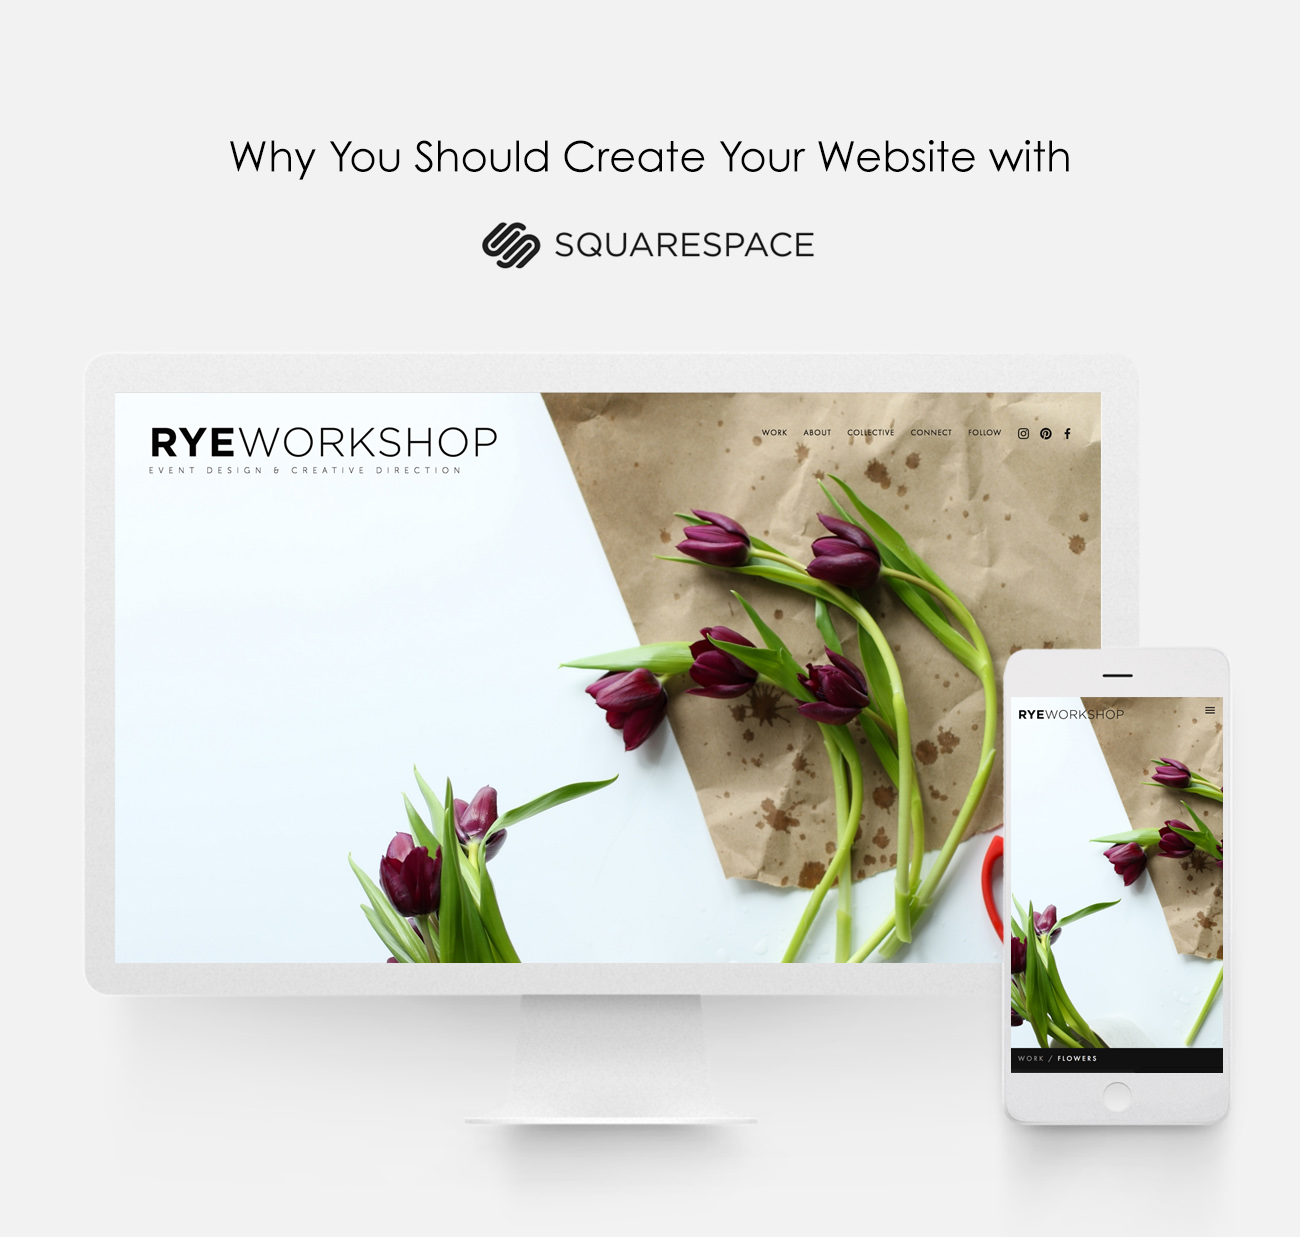 Build Your Website with Squarespace